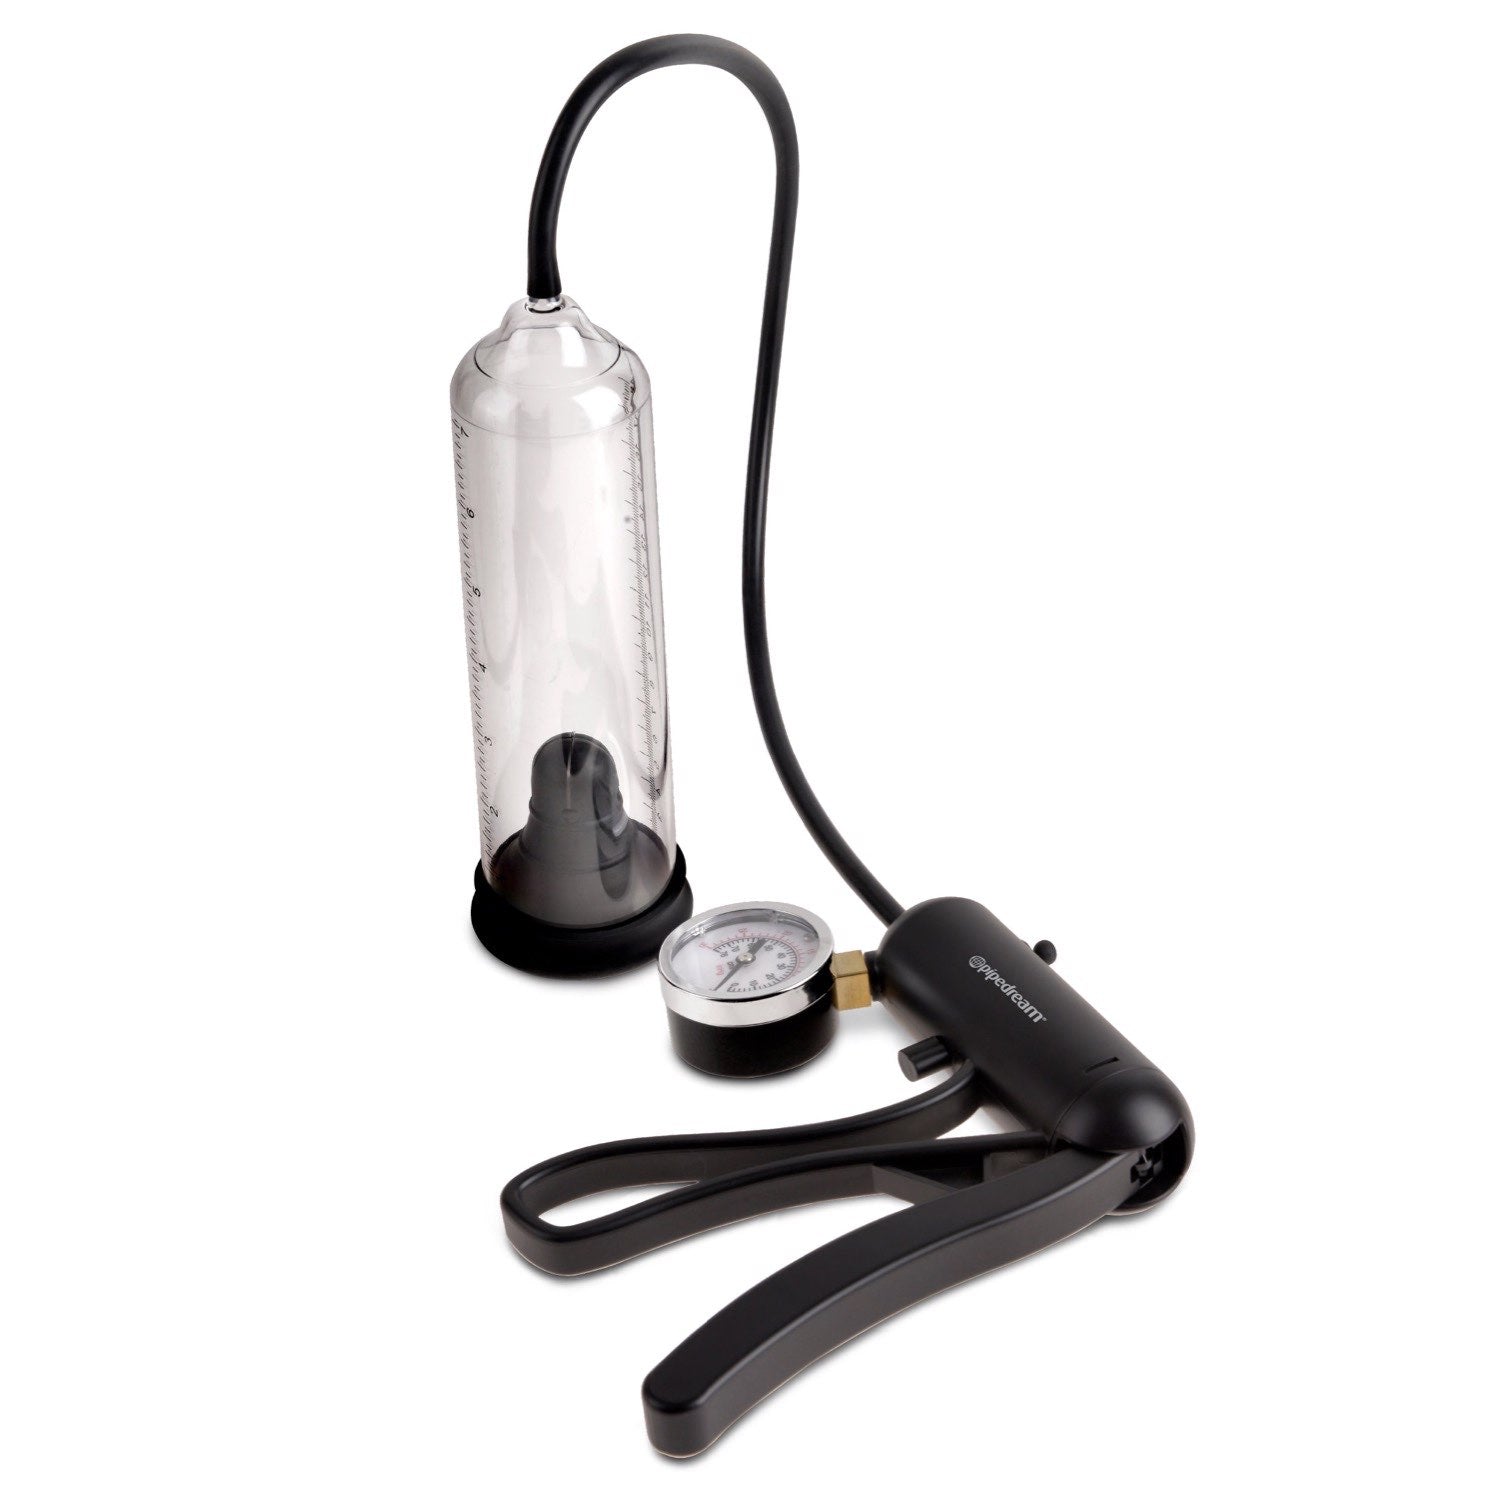 Pump Worx Pro-Gauge Power Pump - Clear Penis Pump with Hand Trigger by Pipedream